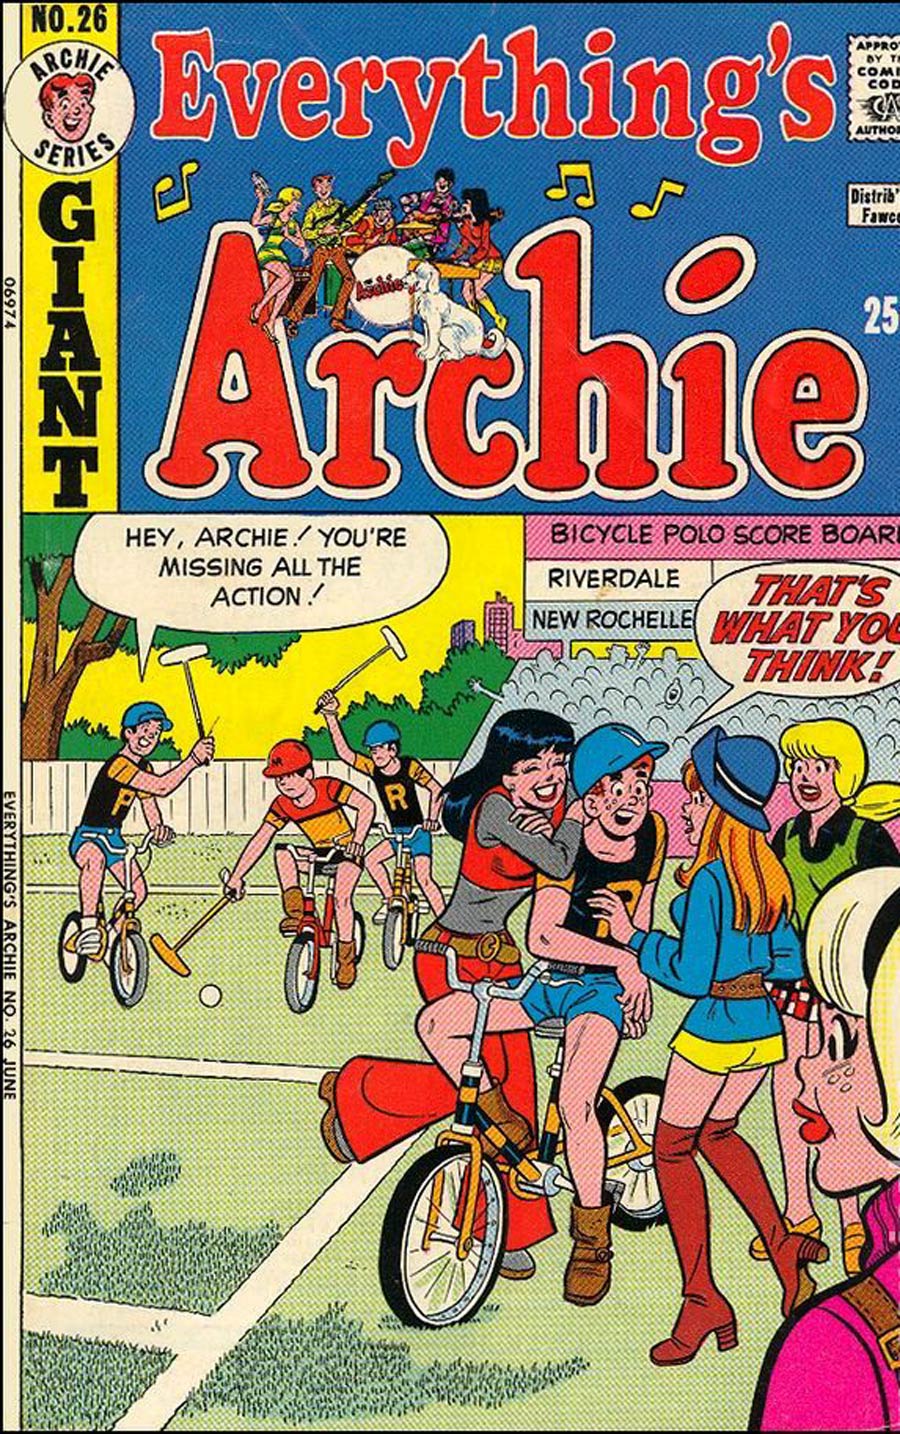 Everythings Archie #26